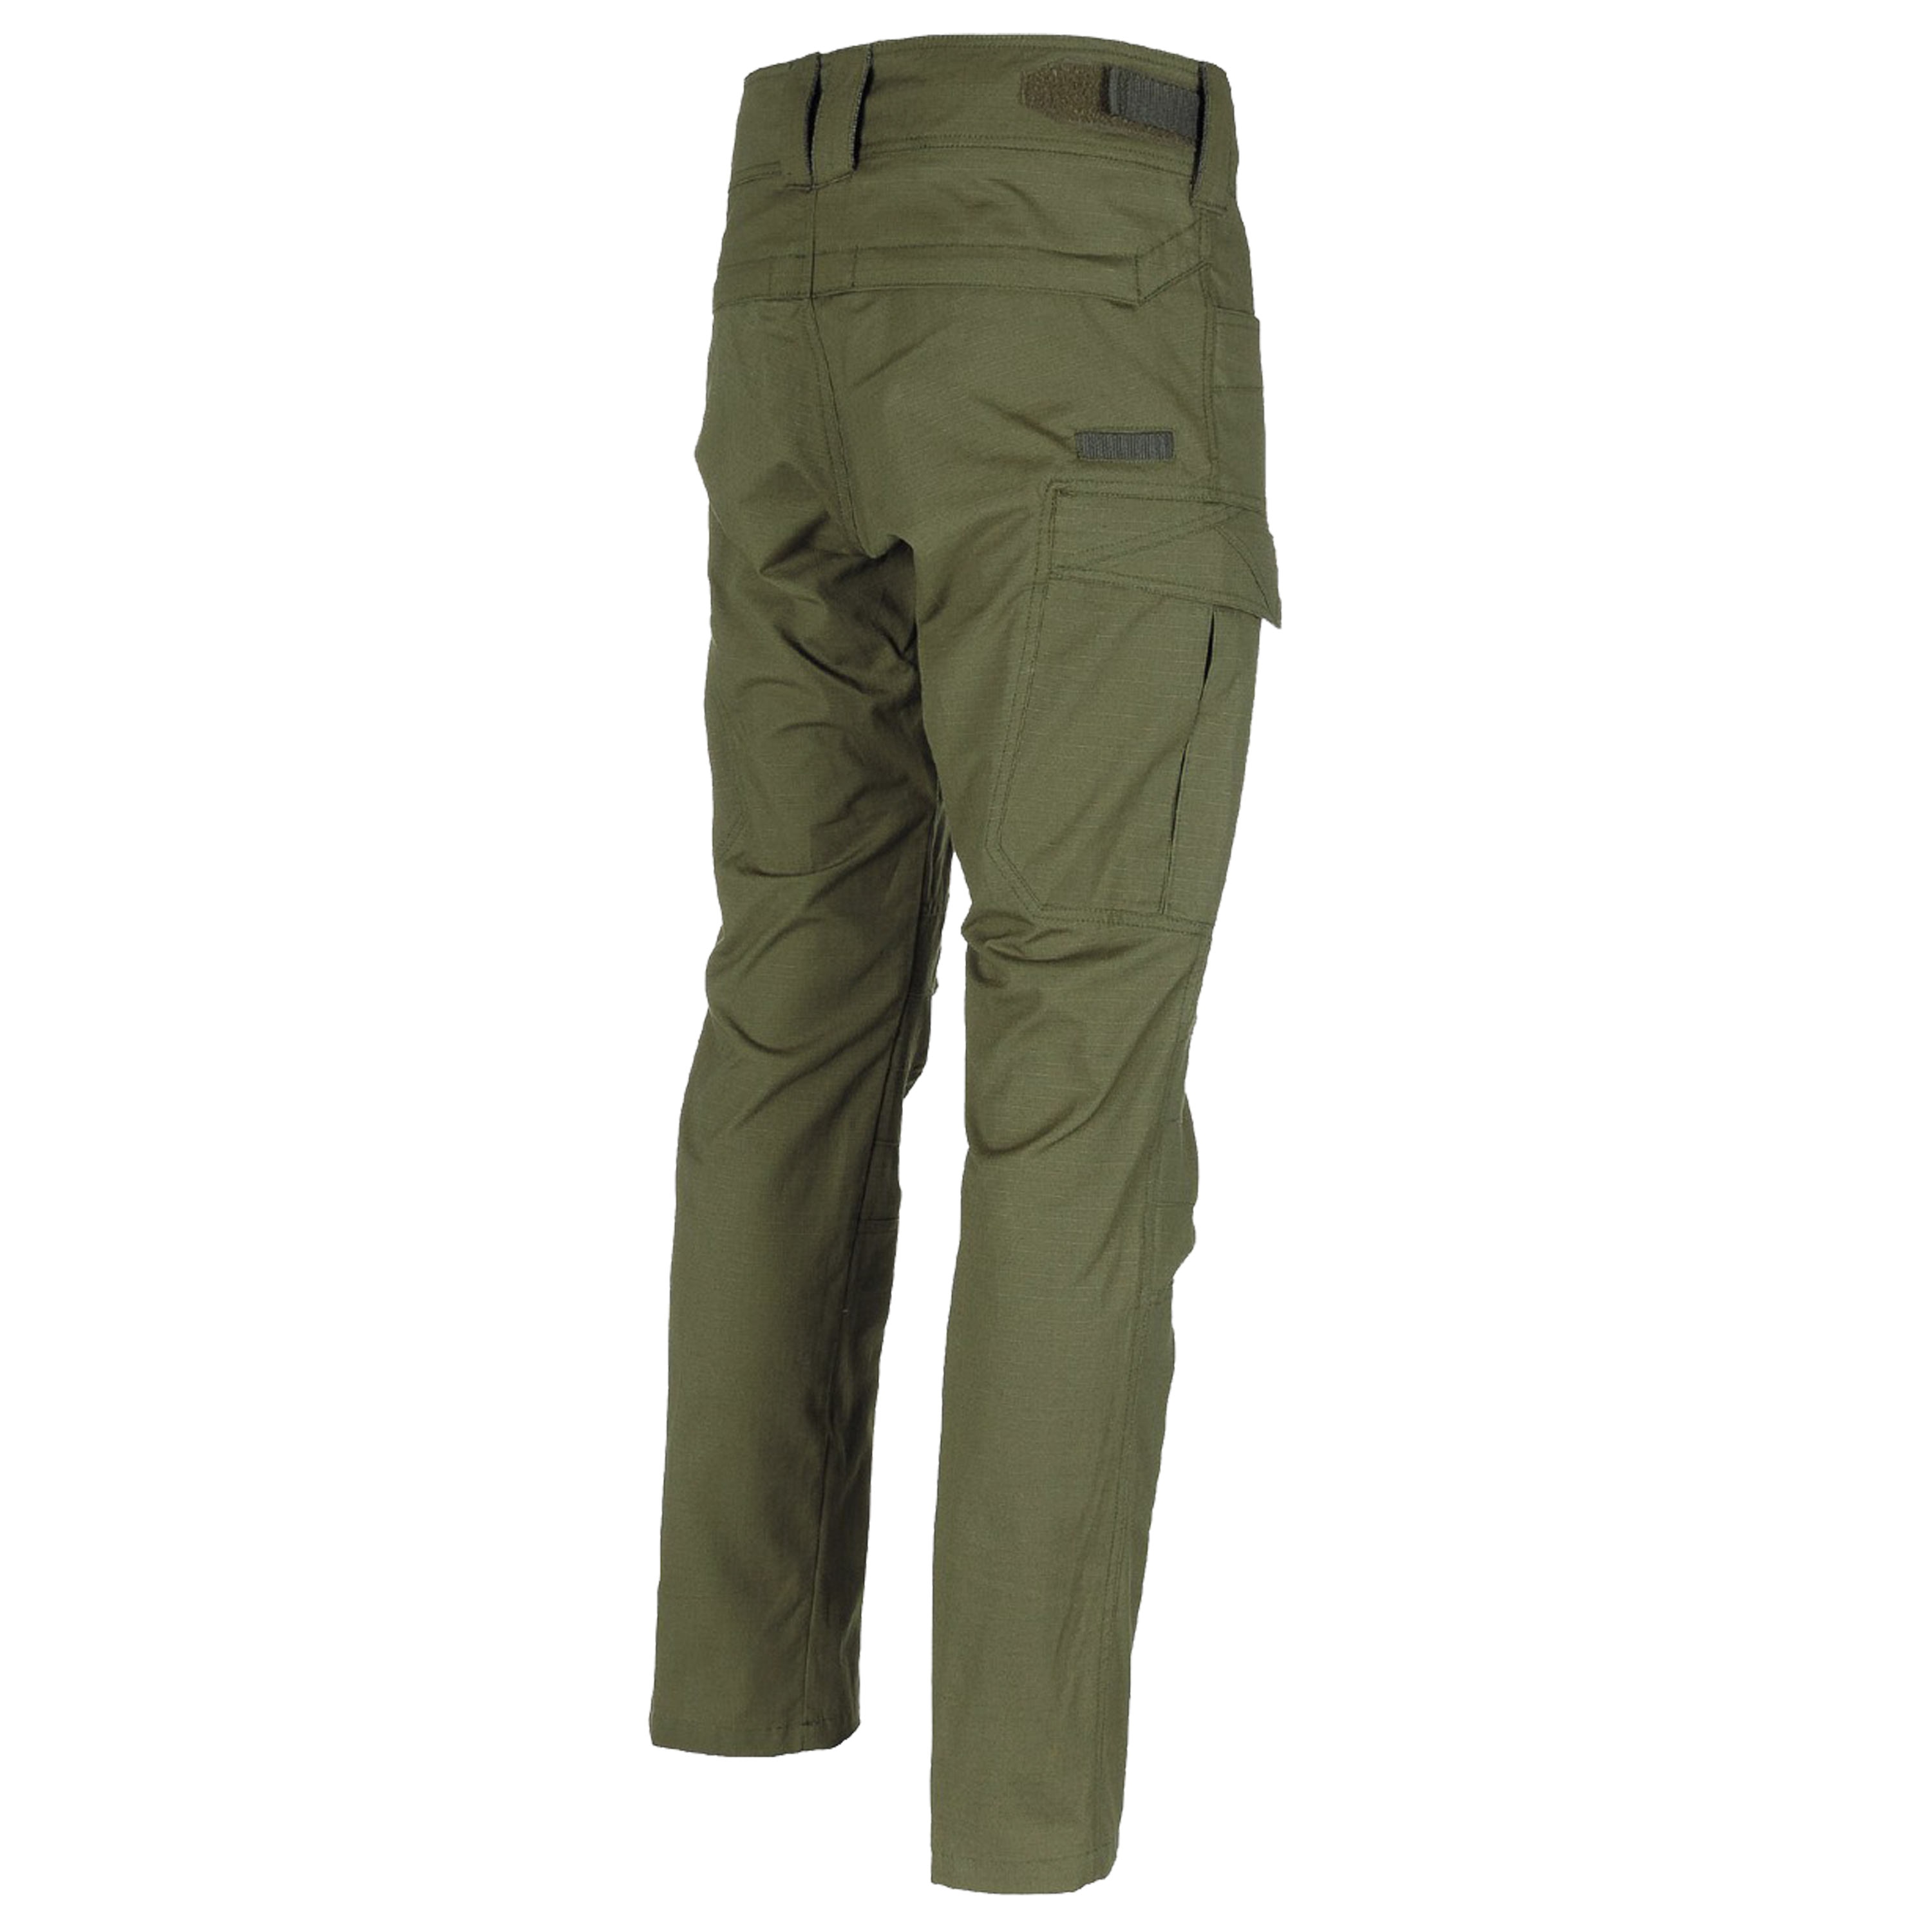 Purchase the MFH Tactical Storm RipStop Pants olive by ASMC